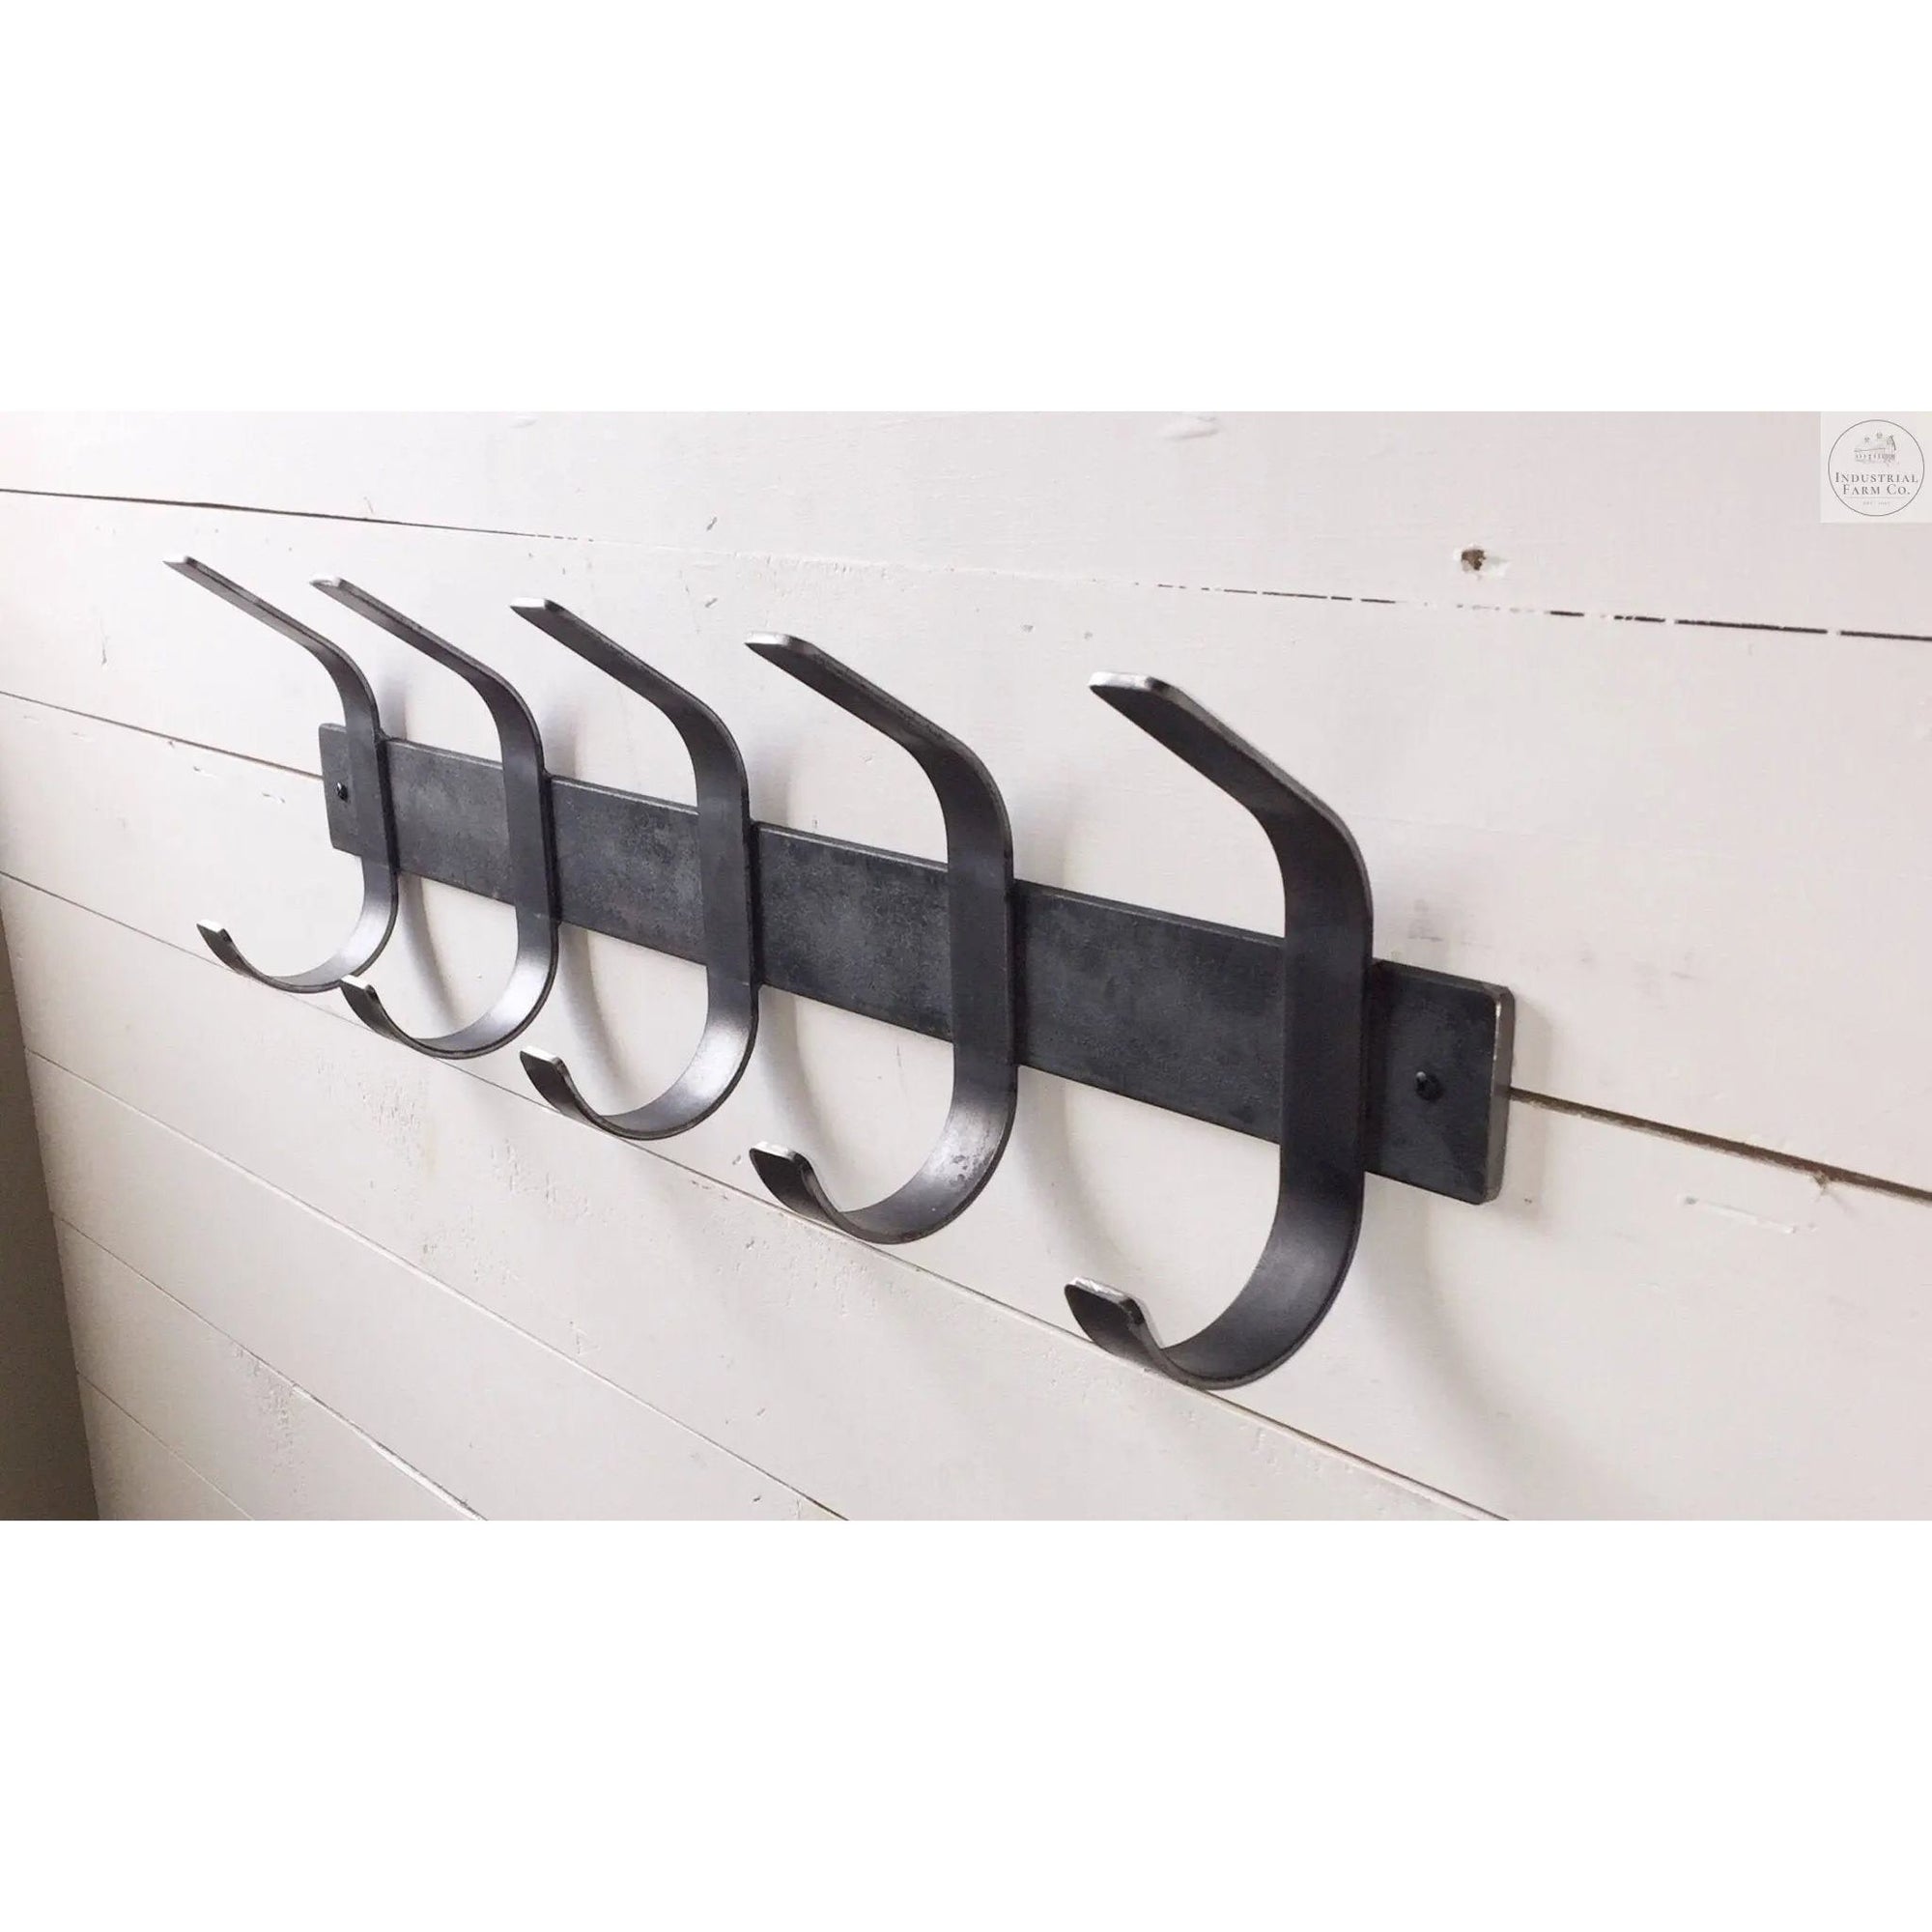 Vintage Barn 3 Decorative Wall Mounted Hooks. Ideal Coat Rack for Walls, Towel Hooks for The Bathroom or Outdoor Pool Area. Matte Black Rustic Cast